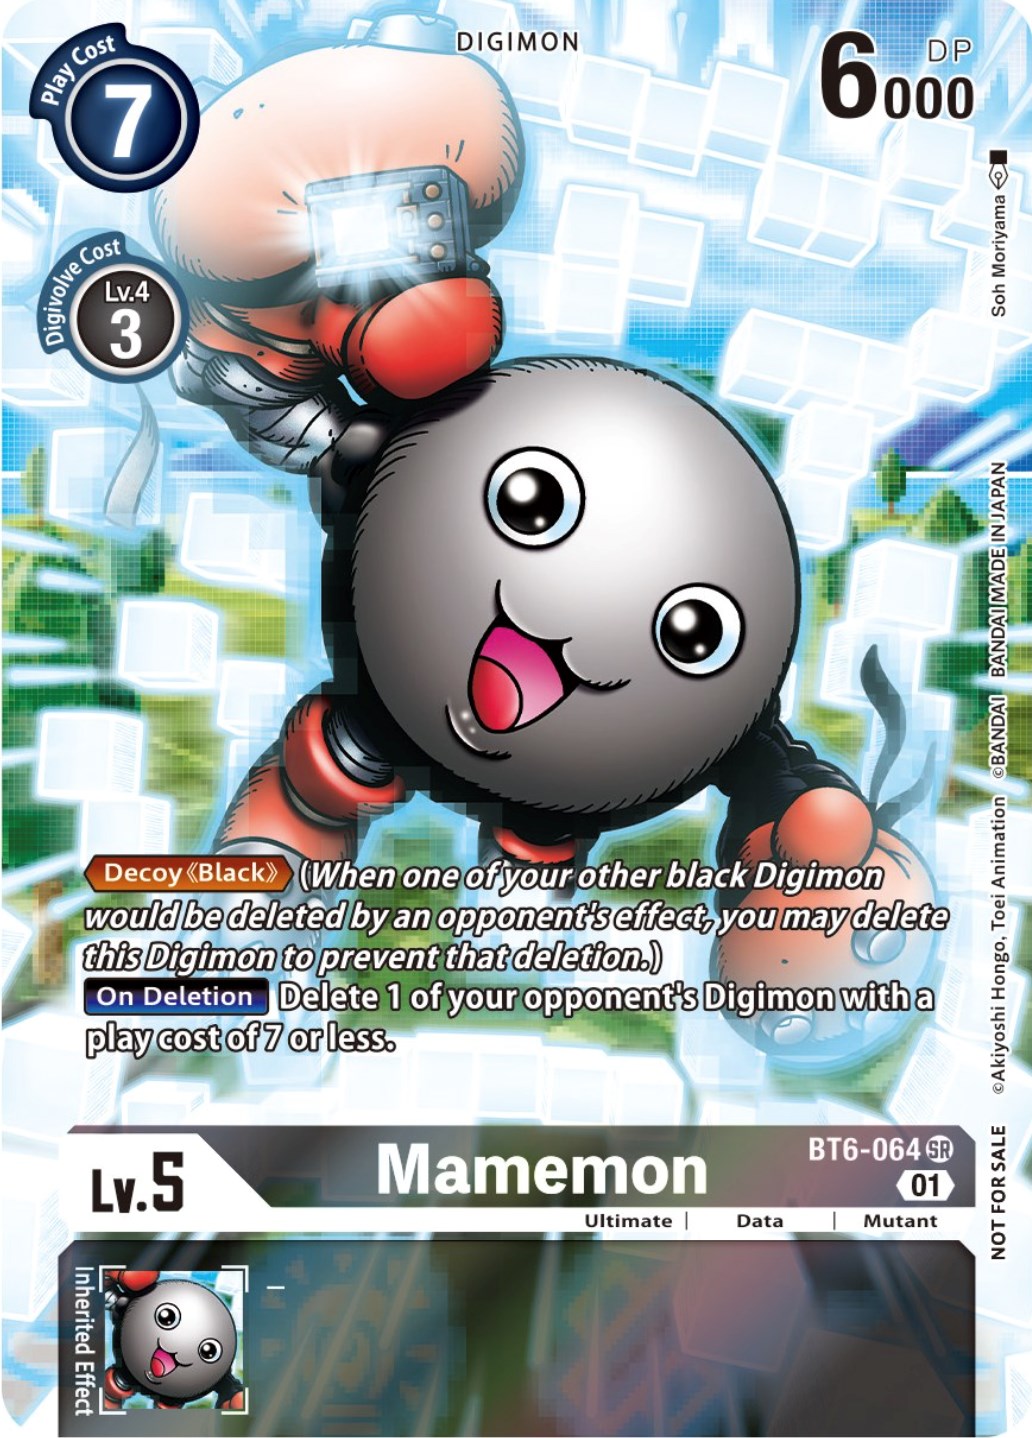 Mamemon [BT6-064] (25th Special Memorial Pack) [Double Diamond Promos] | Amazing Games TCG